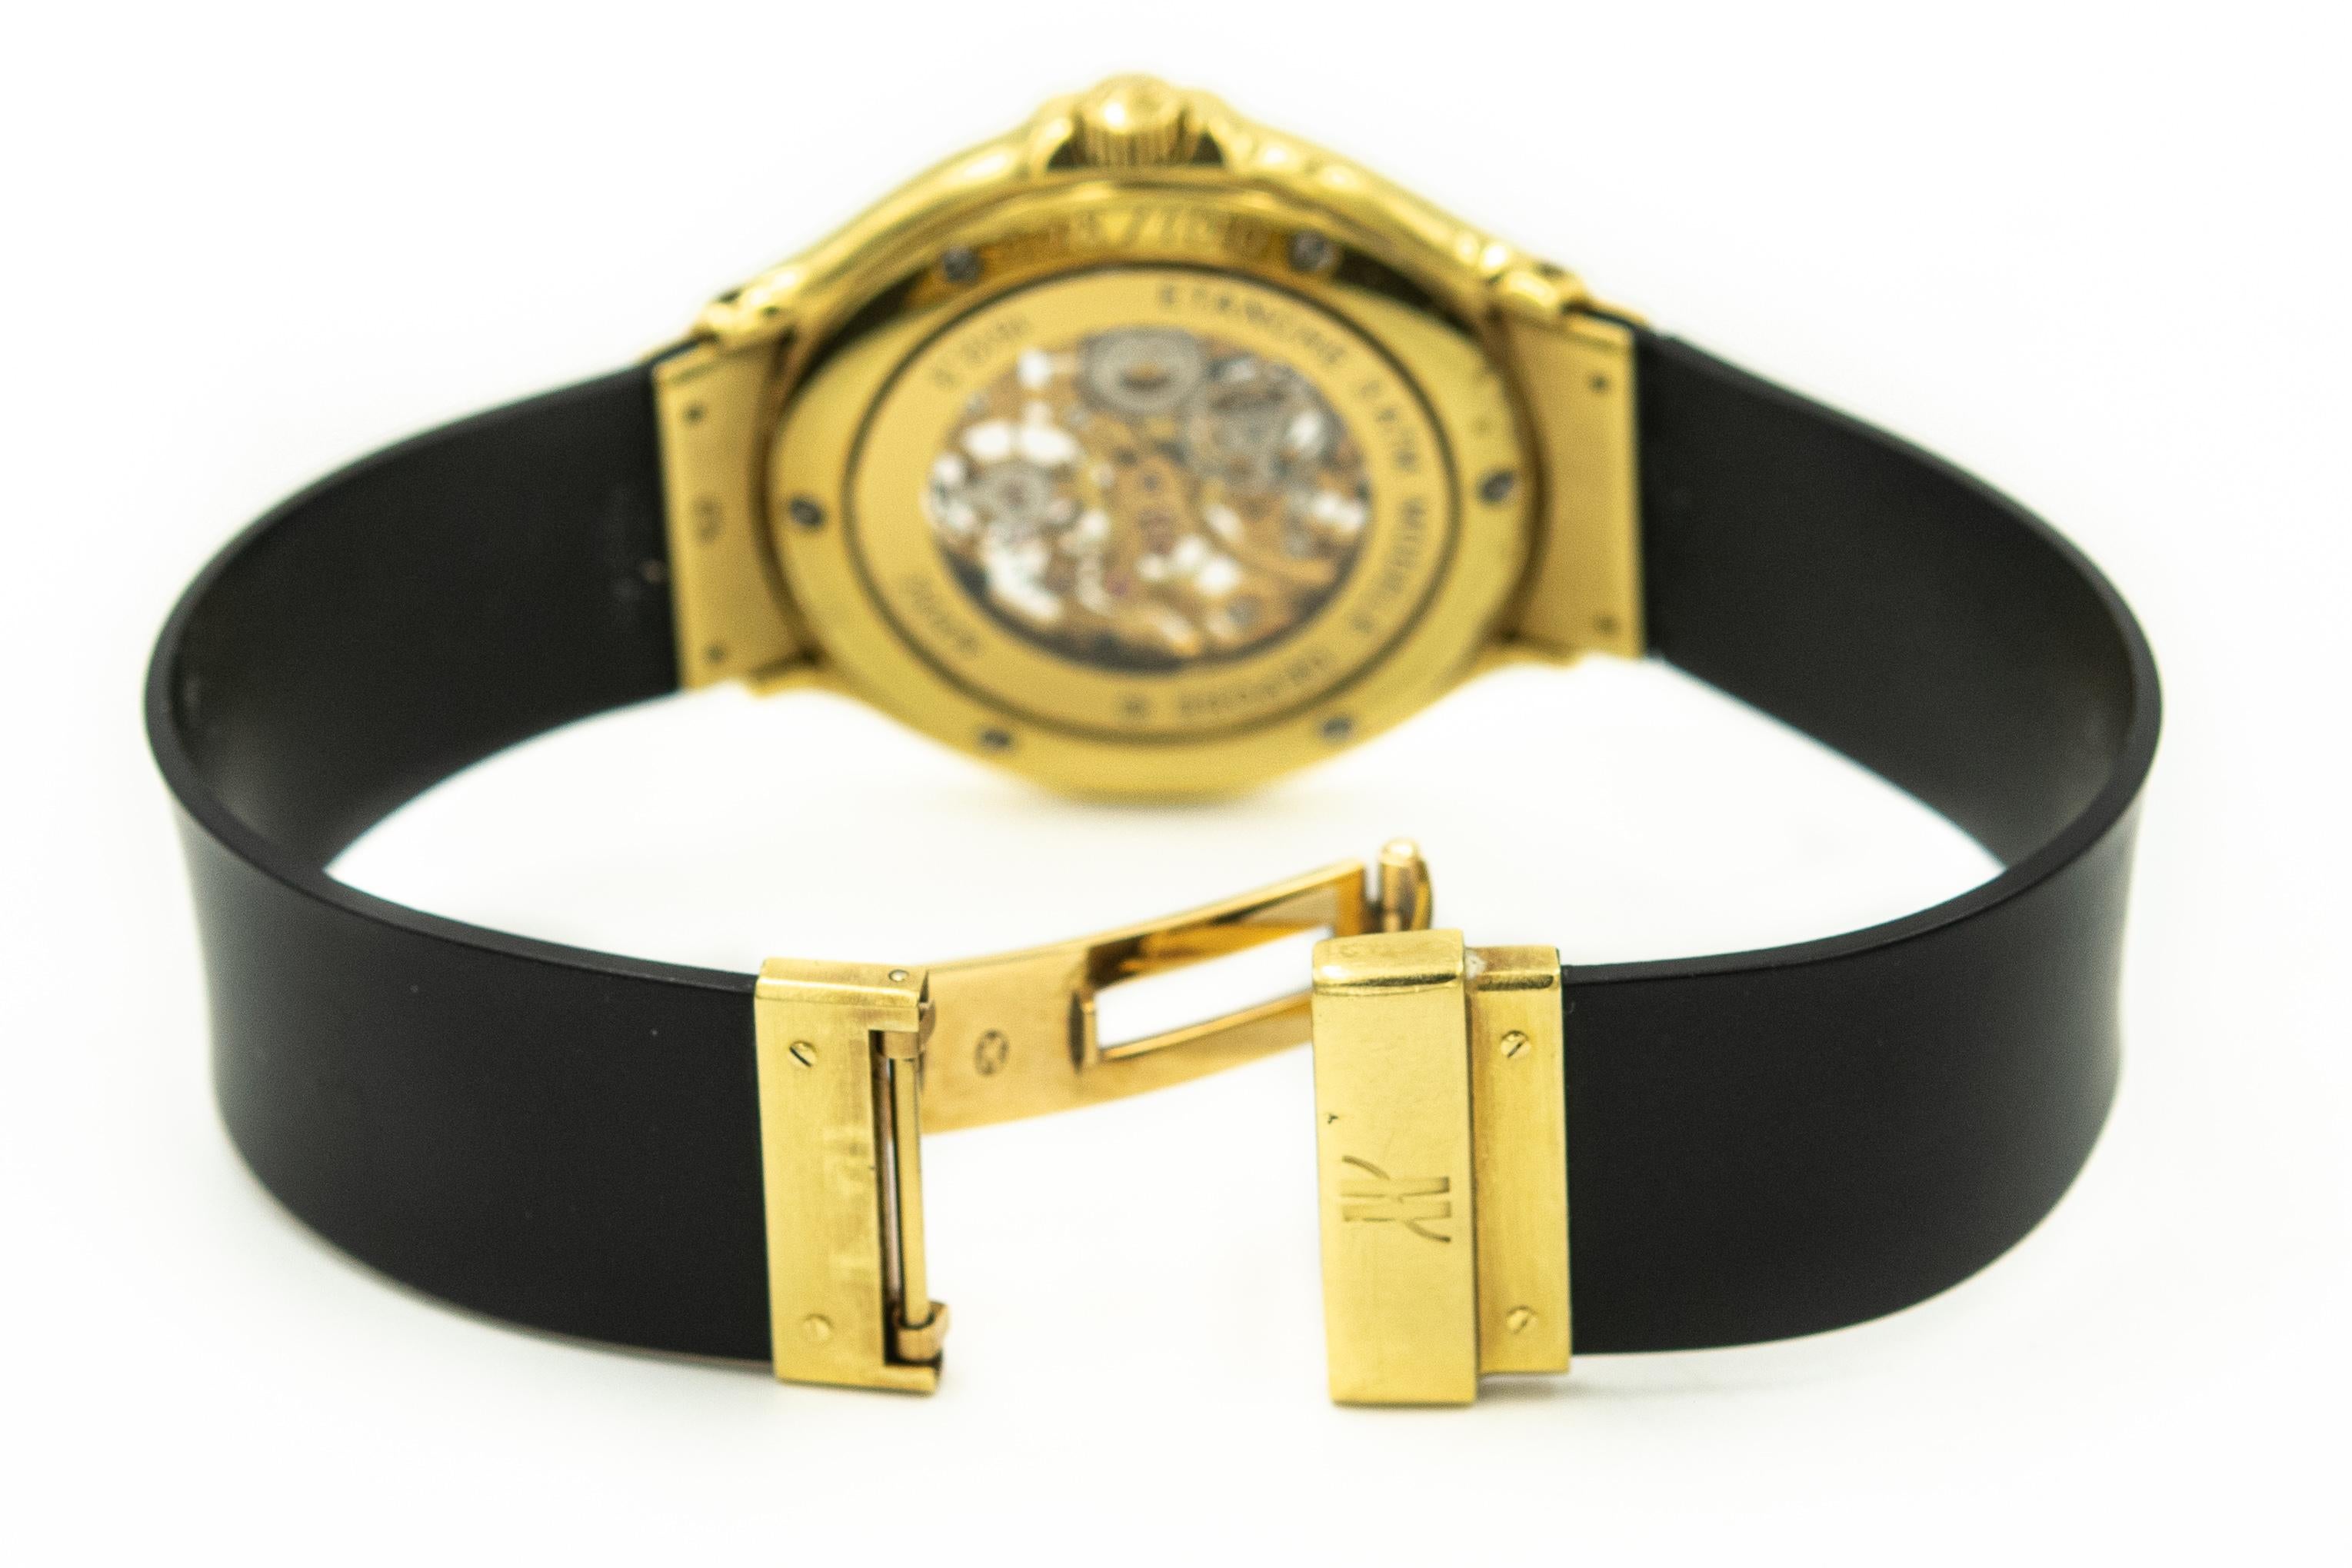 Limited Edition Hublot Unisex MDM Skeleton 18k Yellow Gold Watch Ref. 1512.3 In Good Condition For Sale In Miami Beach, FL